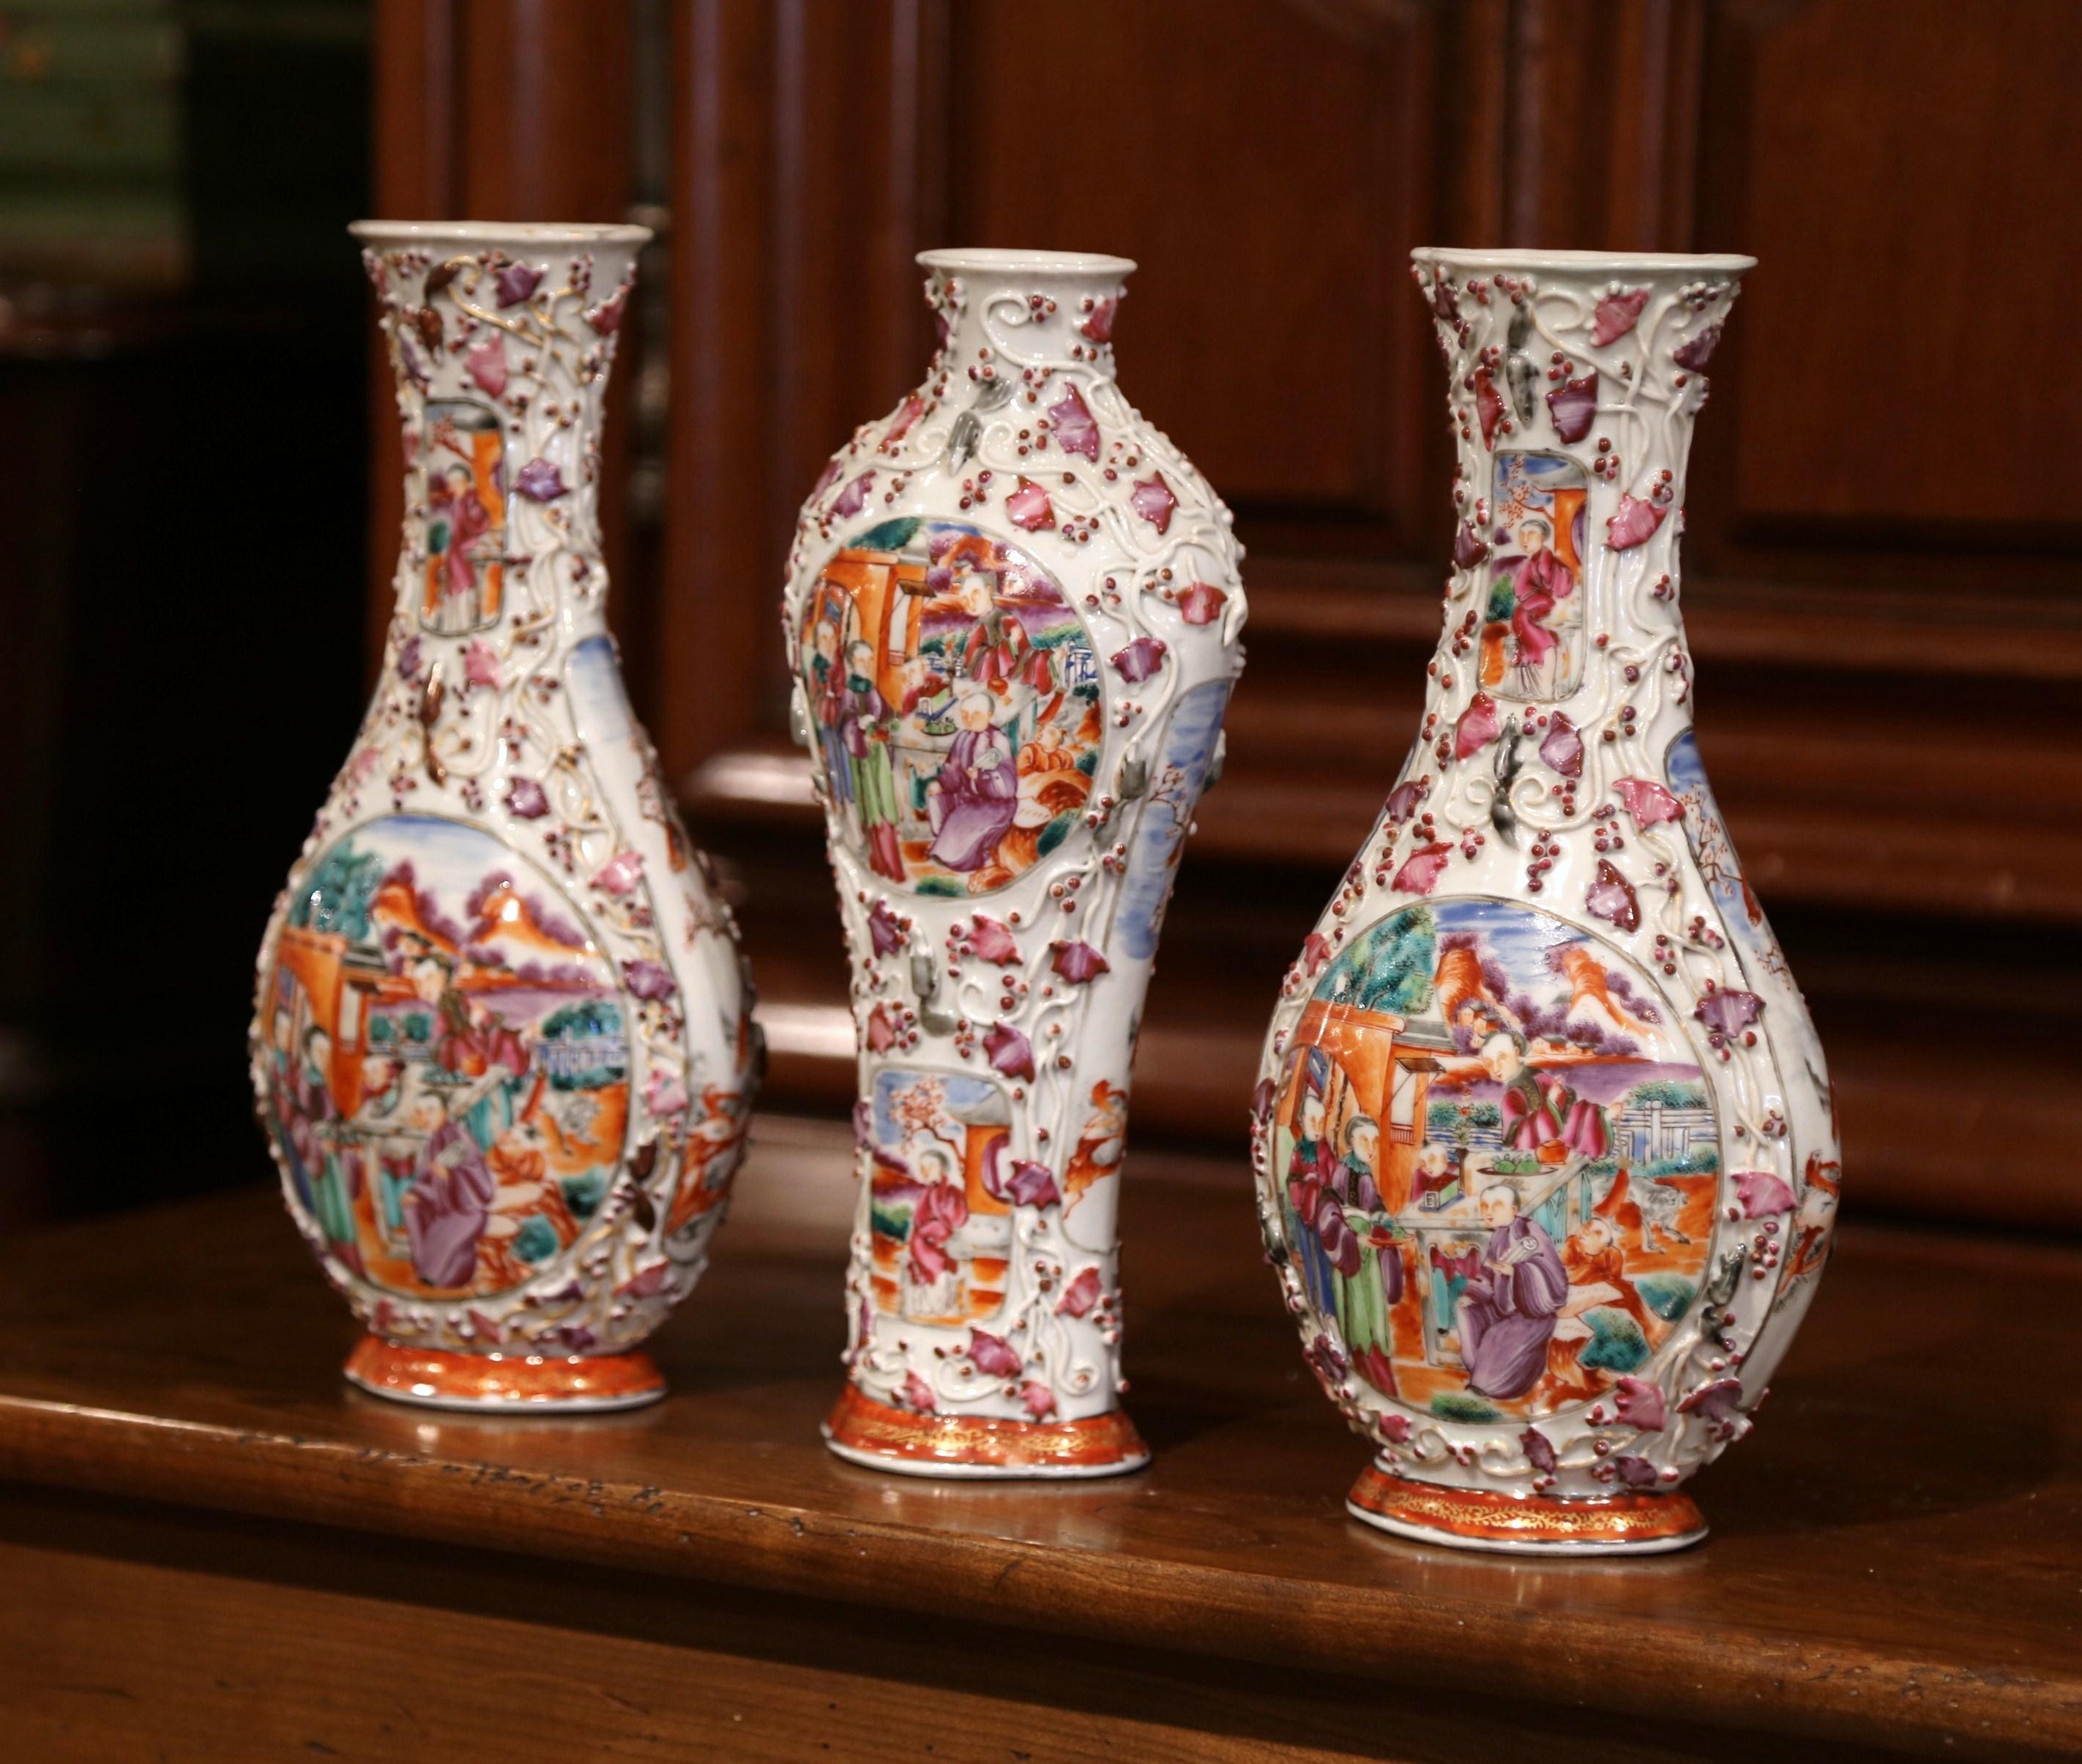 Decorate a mantel with this colorful garniture set of three Chinese export porcelain mandarin palette vases; crafted in China, circa 1850, the vases are in high relief and feature painted chinoiserie decor with figurative Mandarin scenes on both